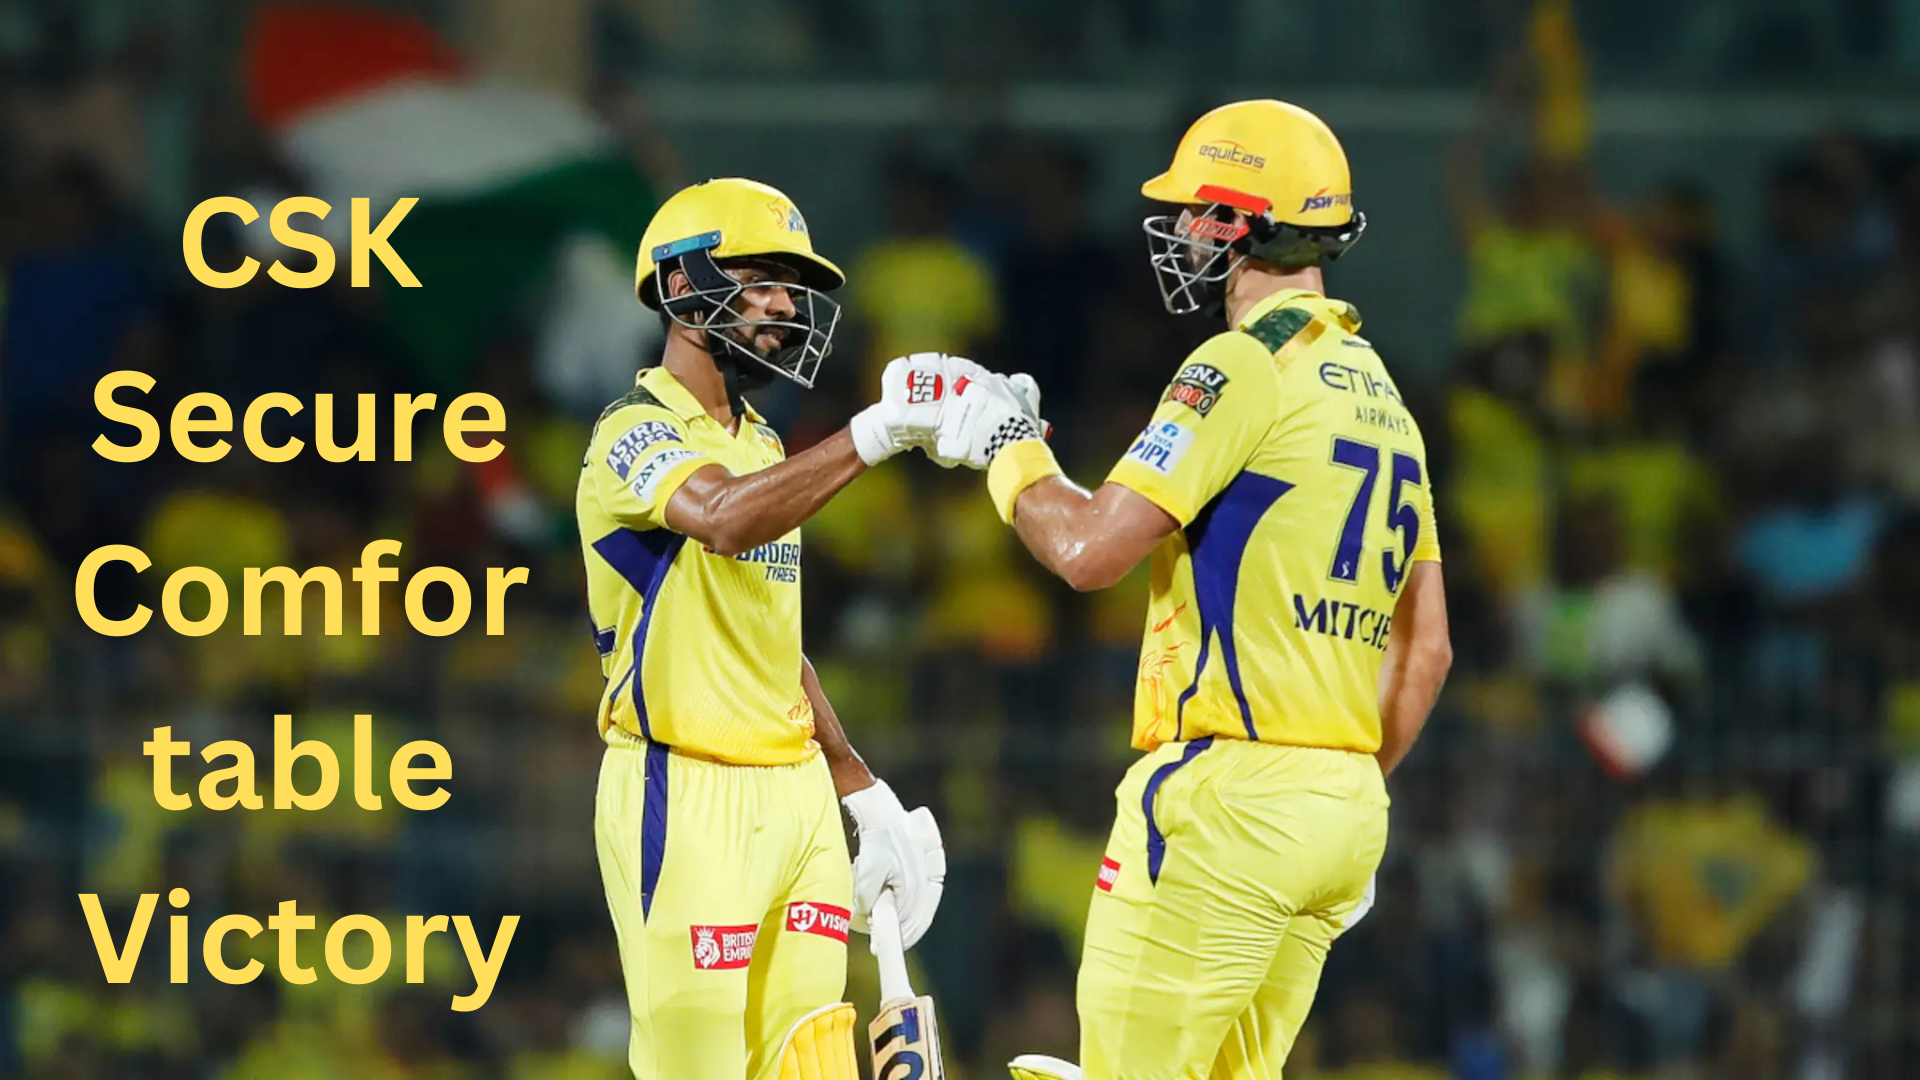 CSK Secure Comfortable Victory With Ruturaj Gaikwad, Tushar Deshpande Leading The Way